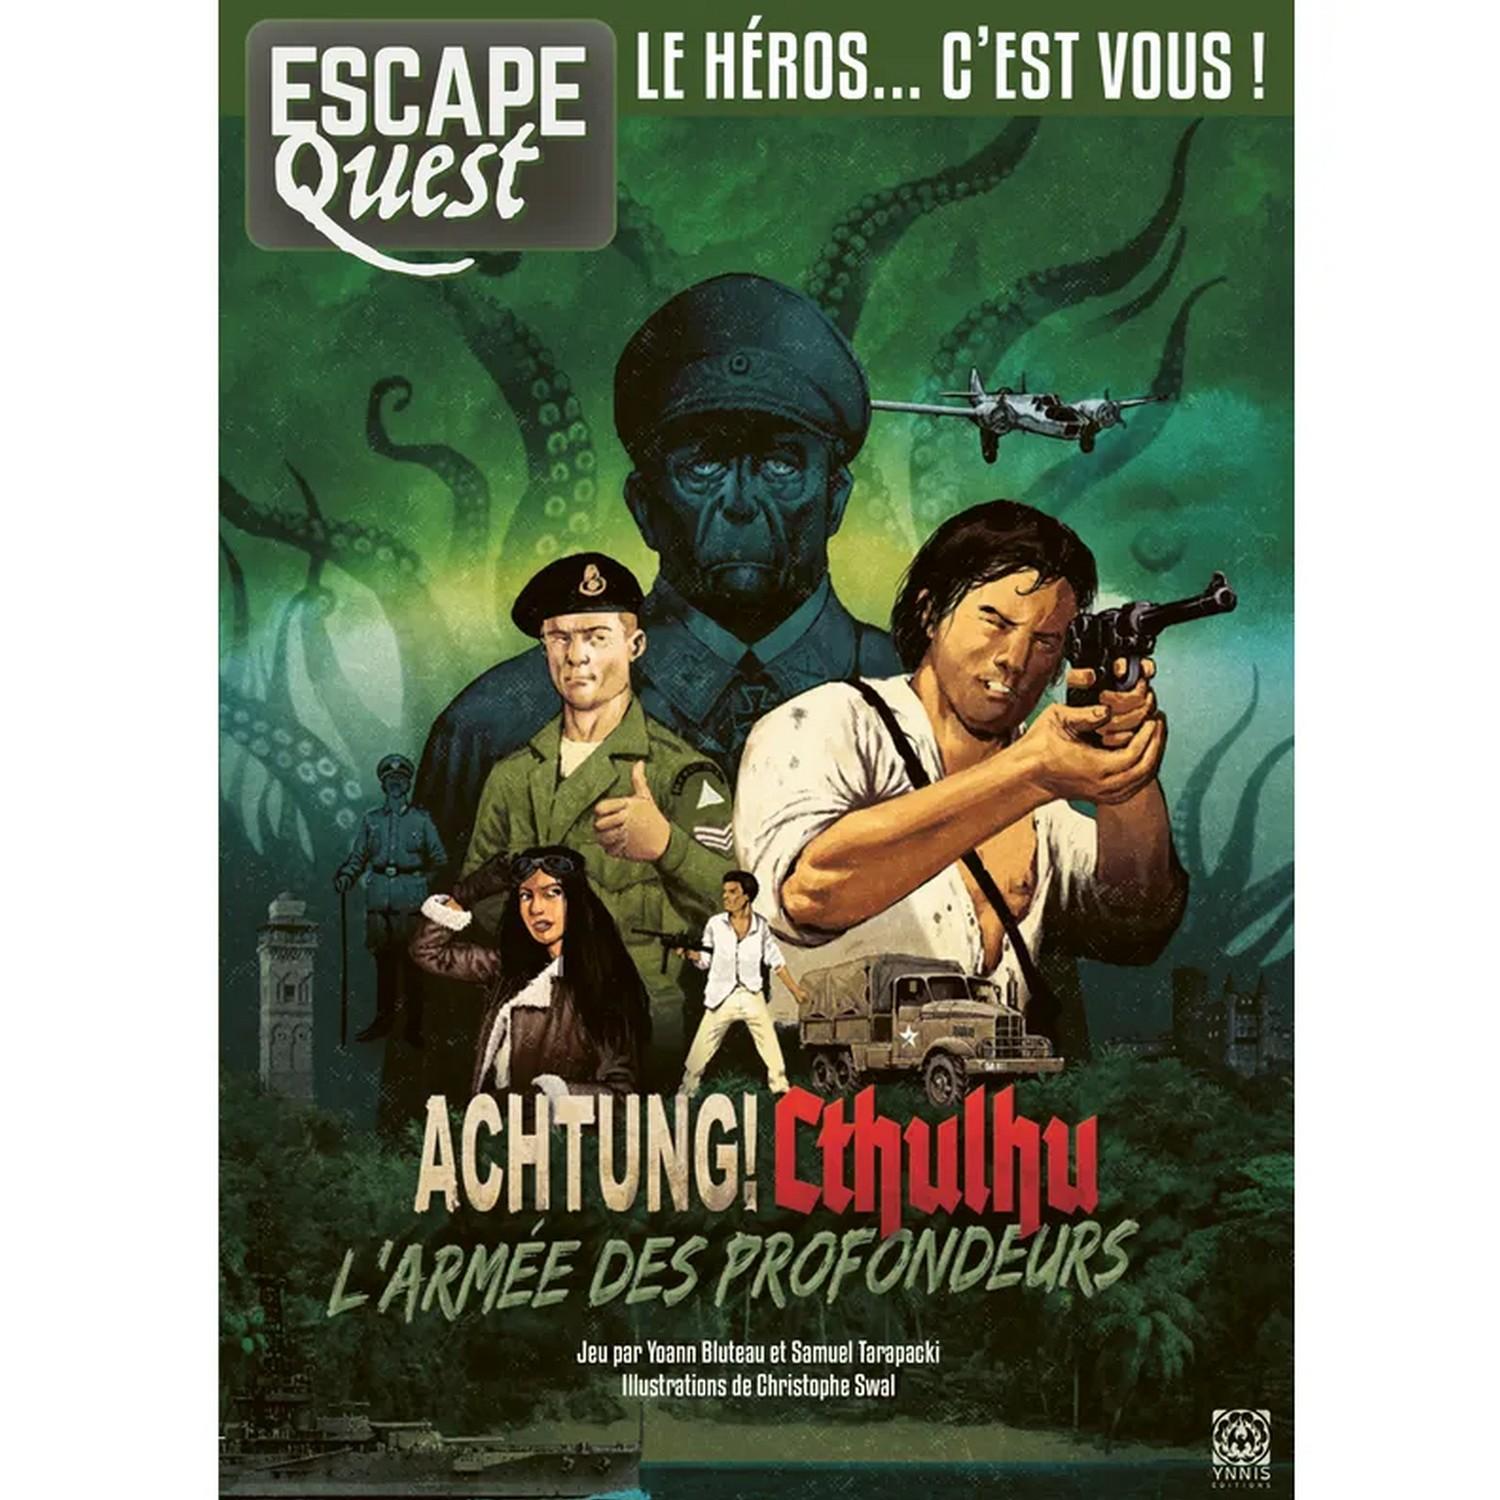 Escape Quest - Tome 11 : Achtung ! Cthulhu !